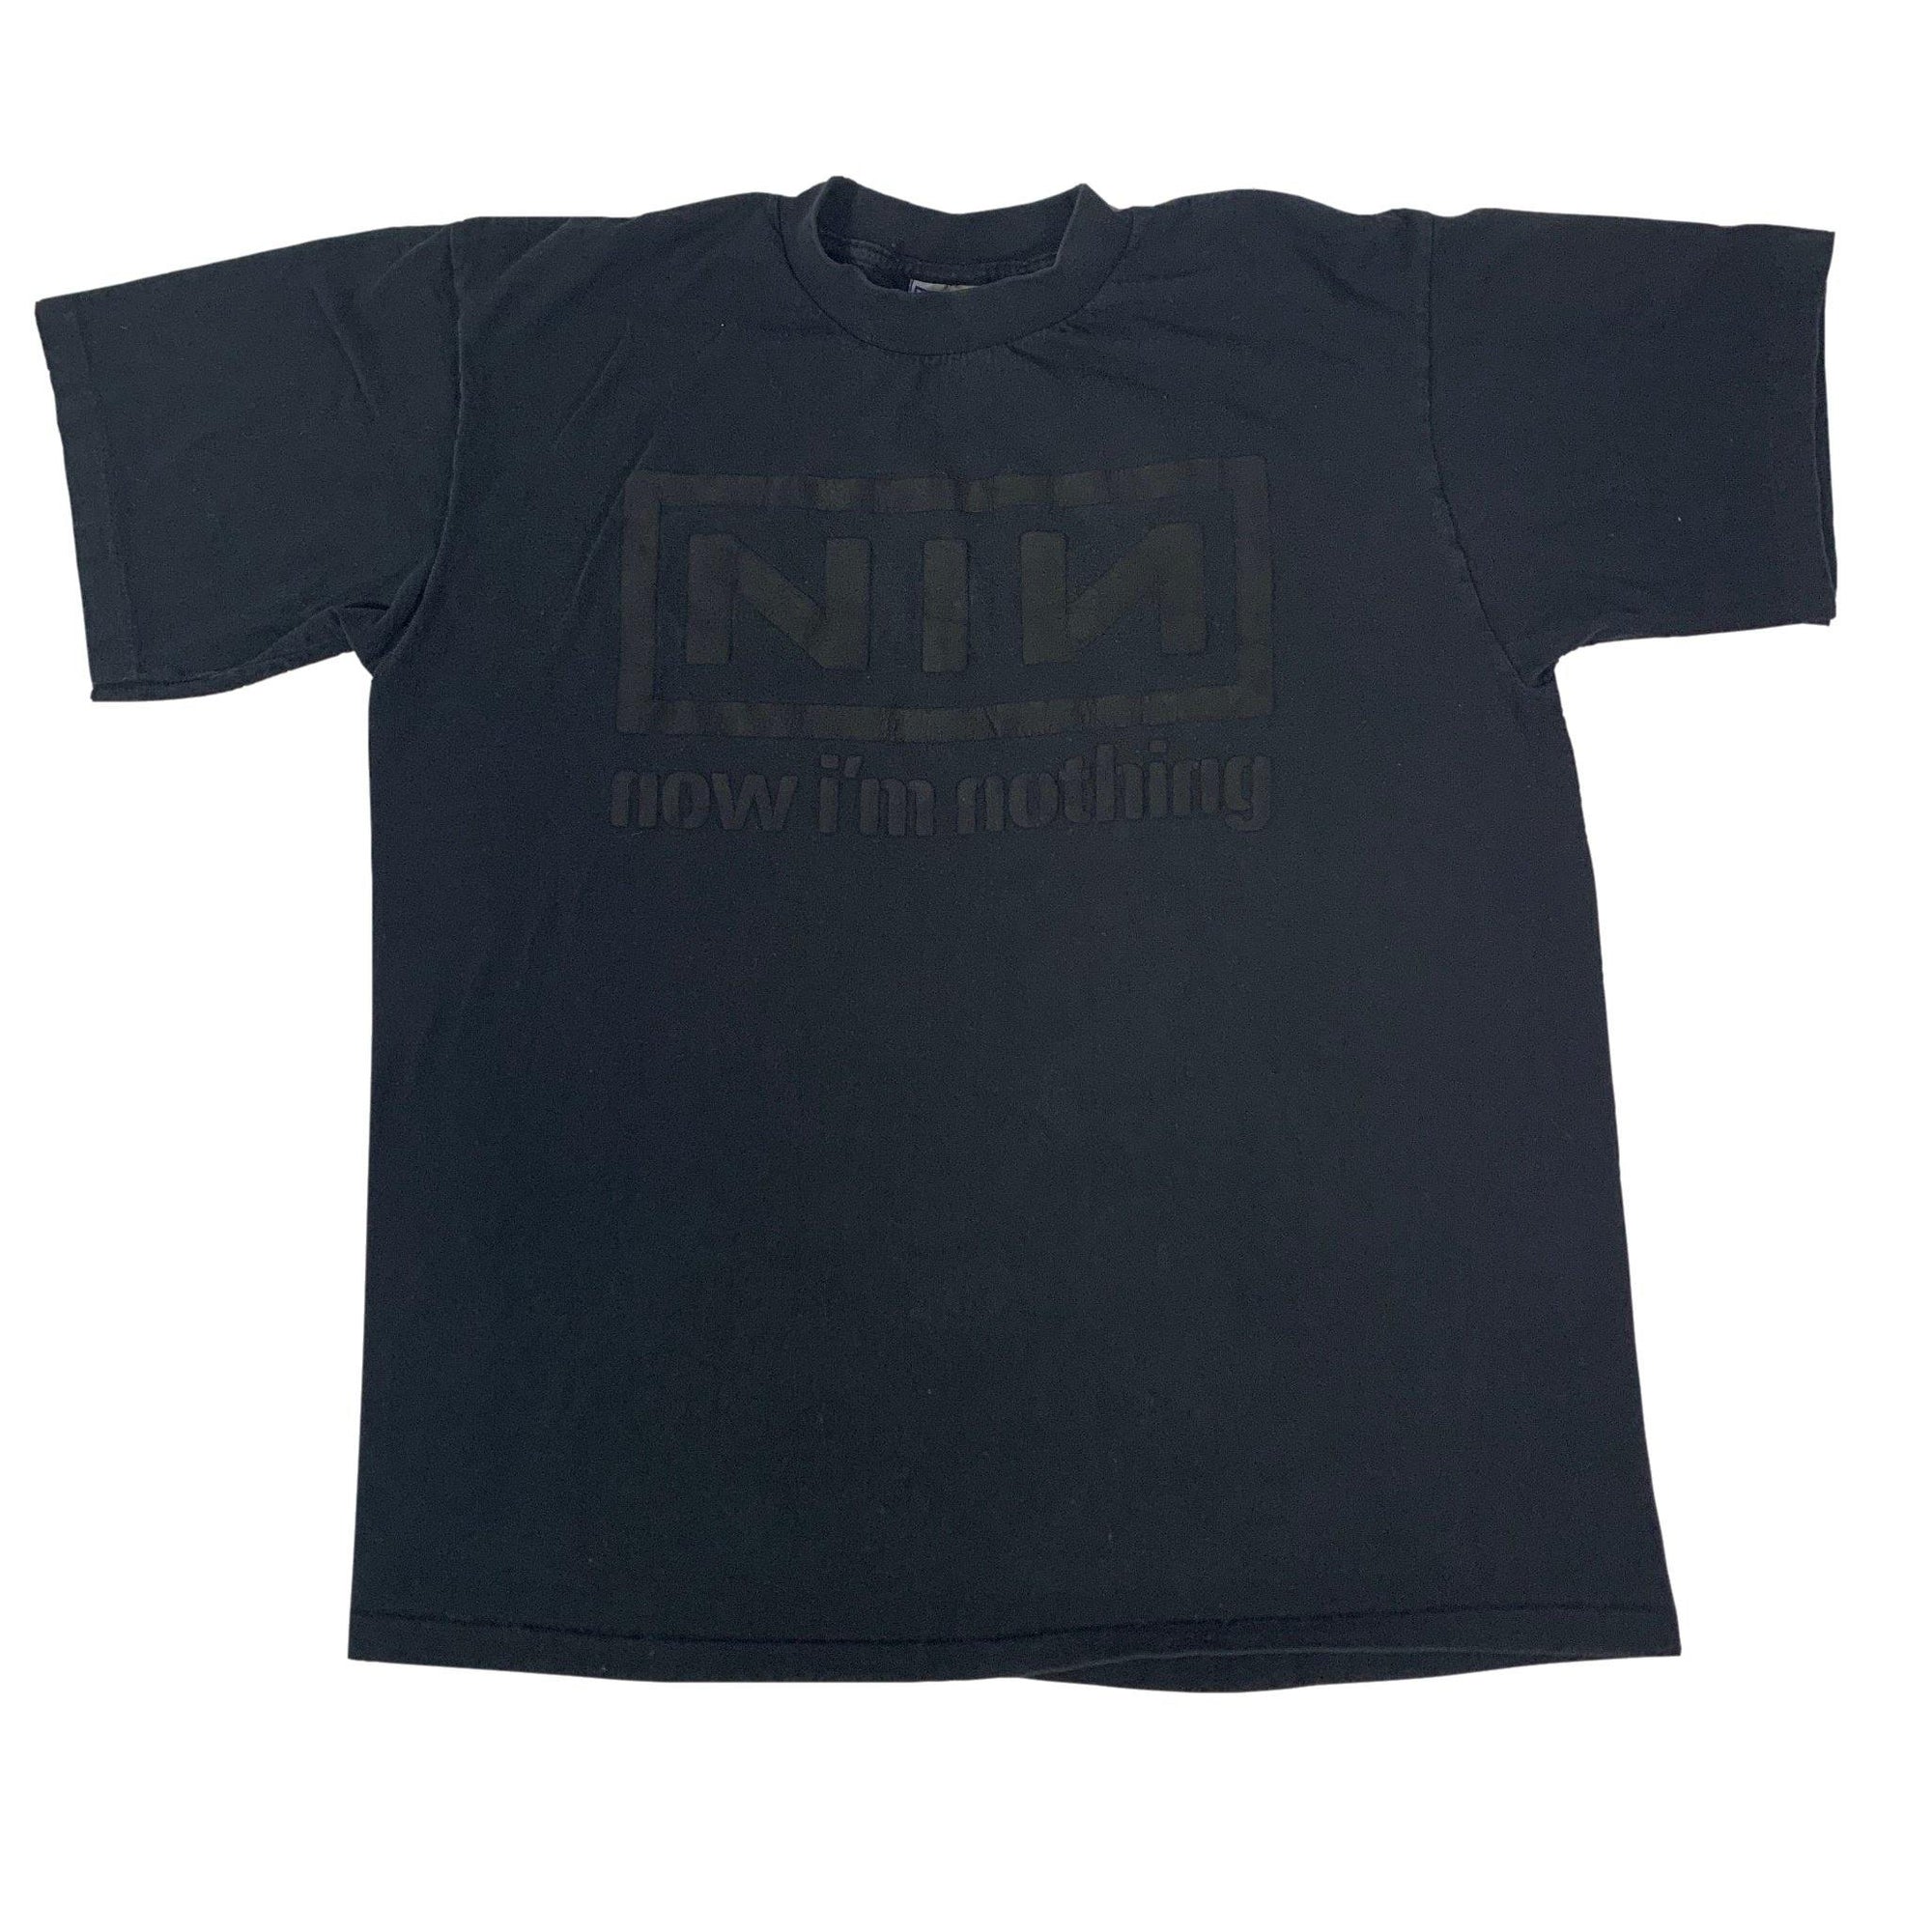 Vintage Nine Inch Nails "Nothing" Puffy Ink T-Shirt - jointcustodydc